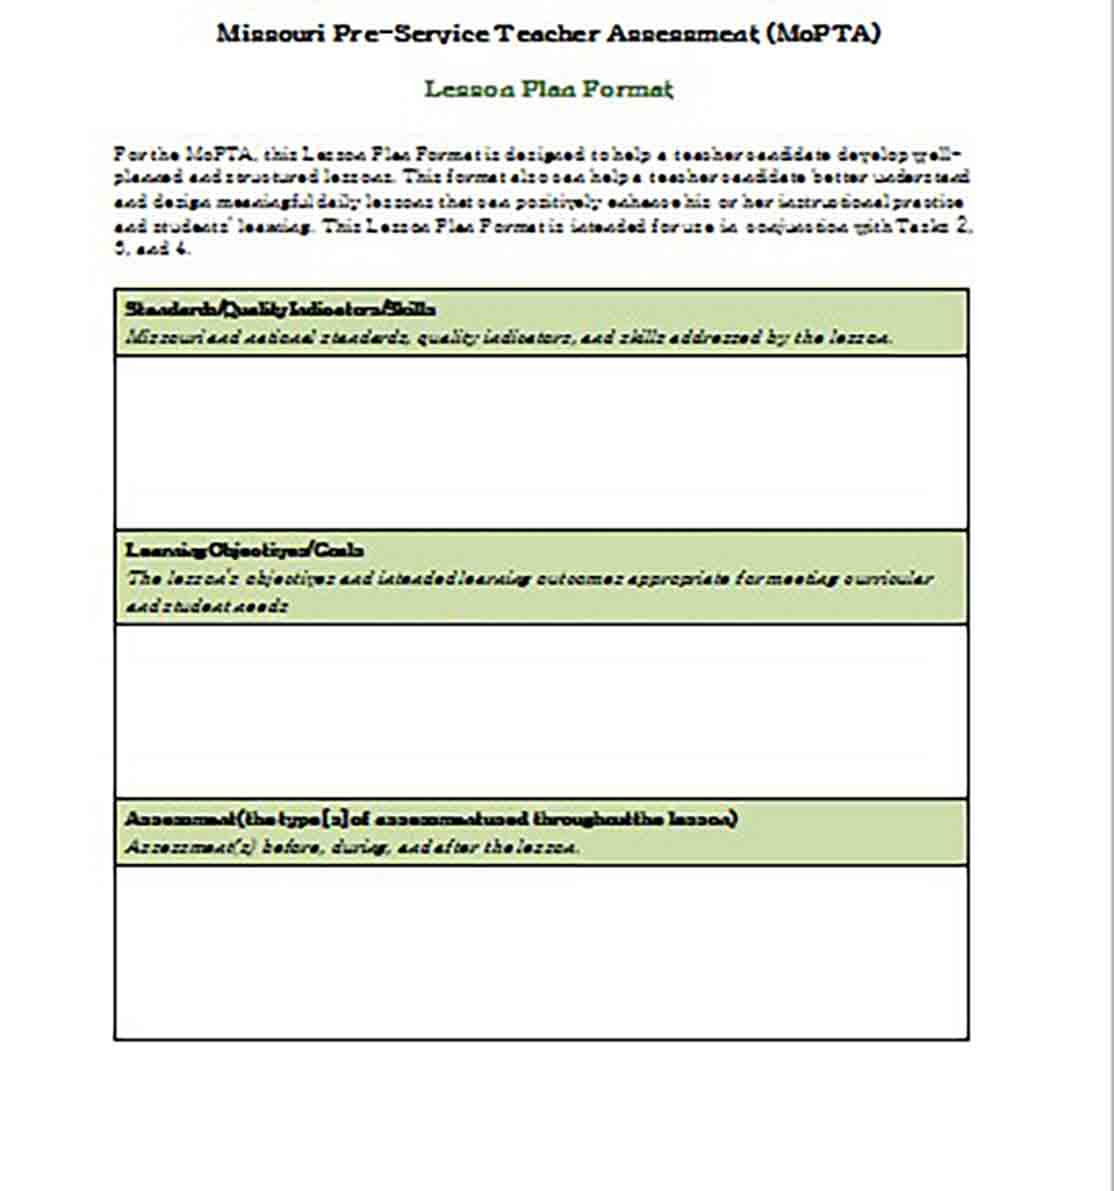 Lesson Plan Layout What to Include In the Lesson Plan Template for the Best